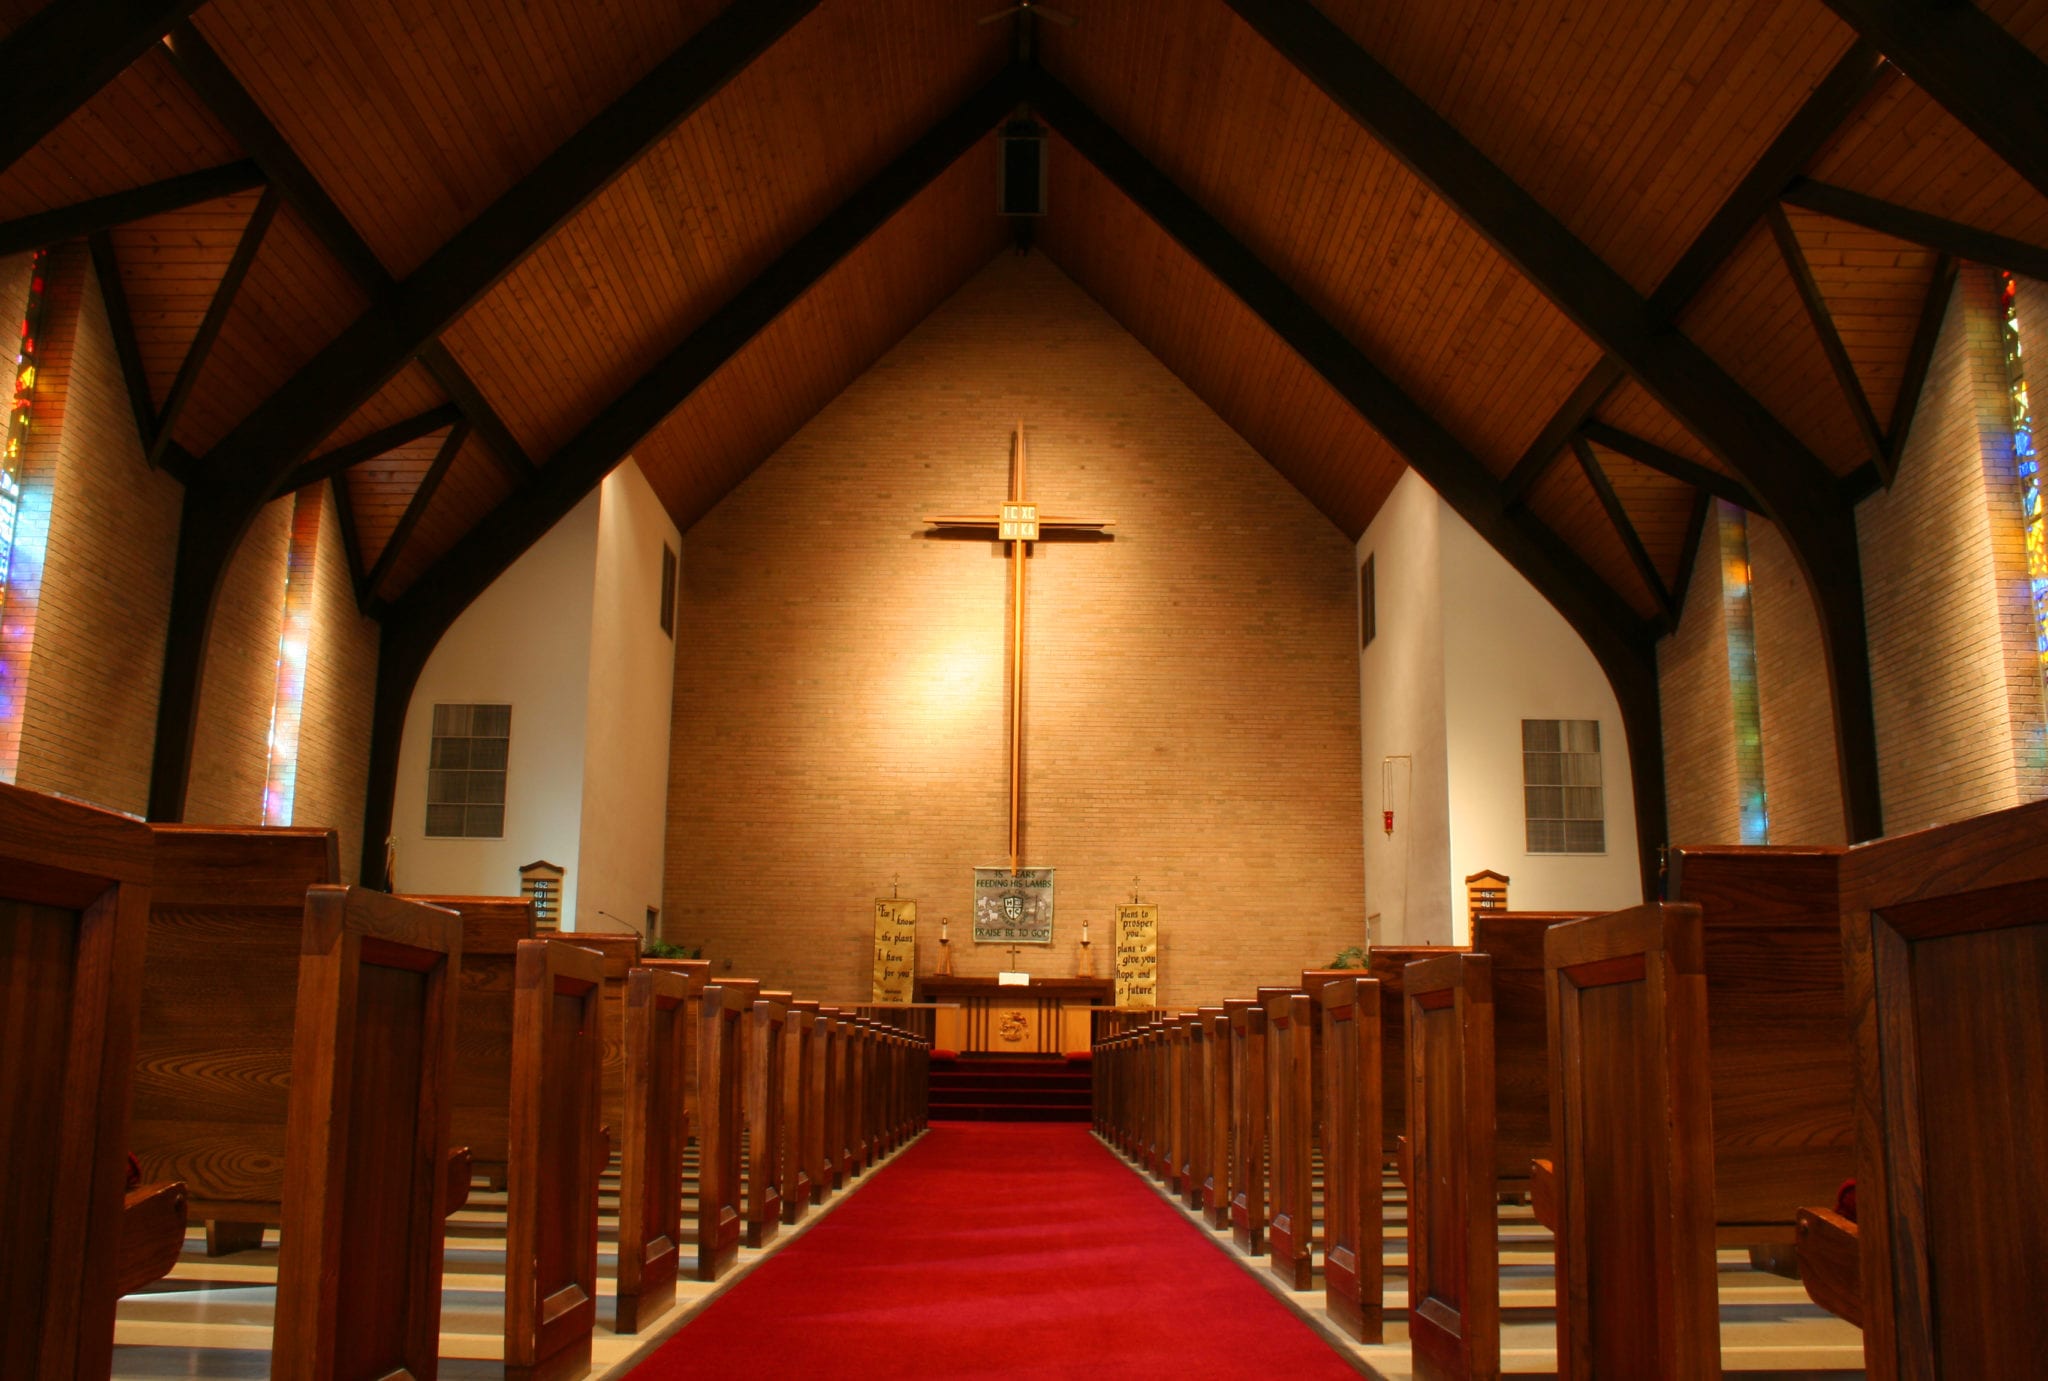 Insurance for Religious Organizations